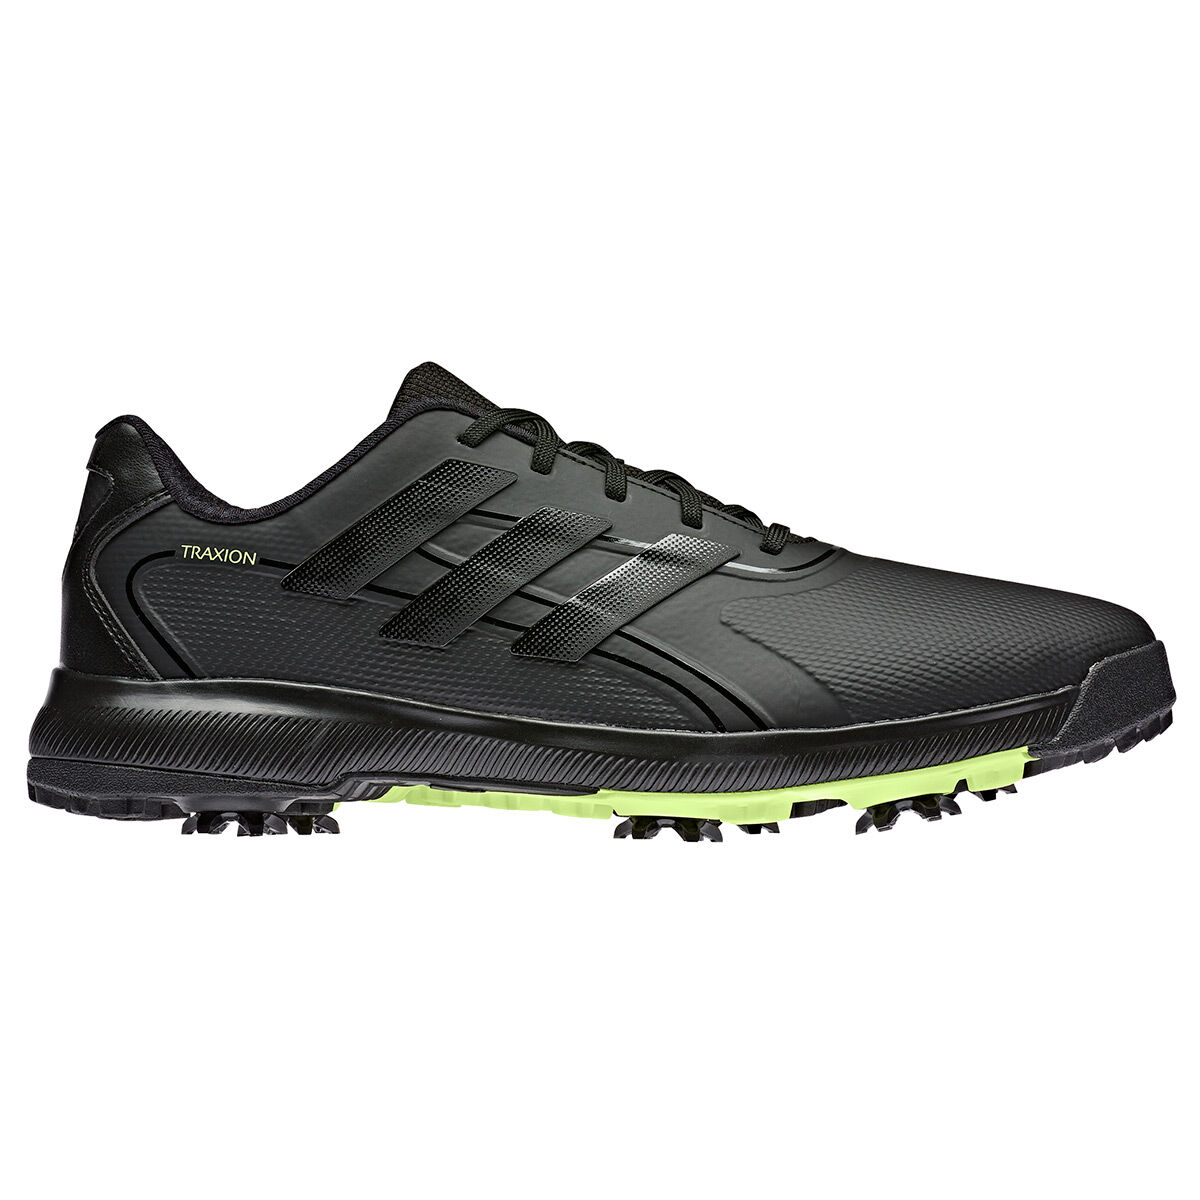 adidas Men’s Traxion Lite Max Waterproof Spiked Golf Shoes, Mens, Black/white/lime, 7, Wide | American Golf